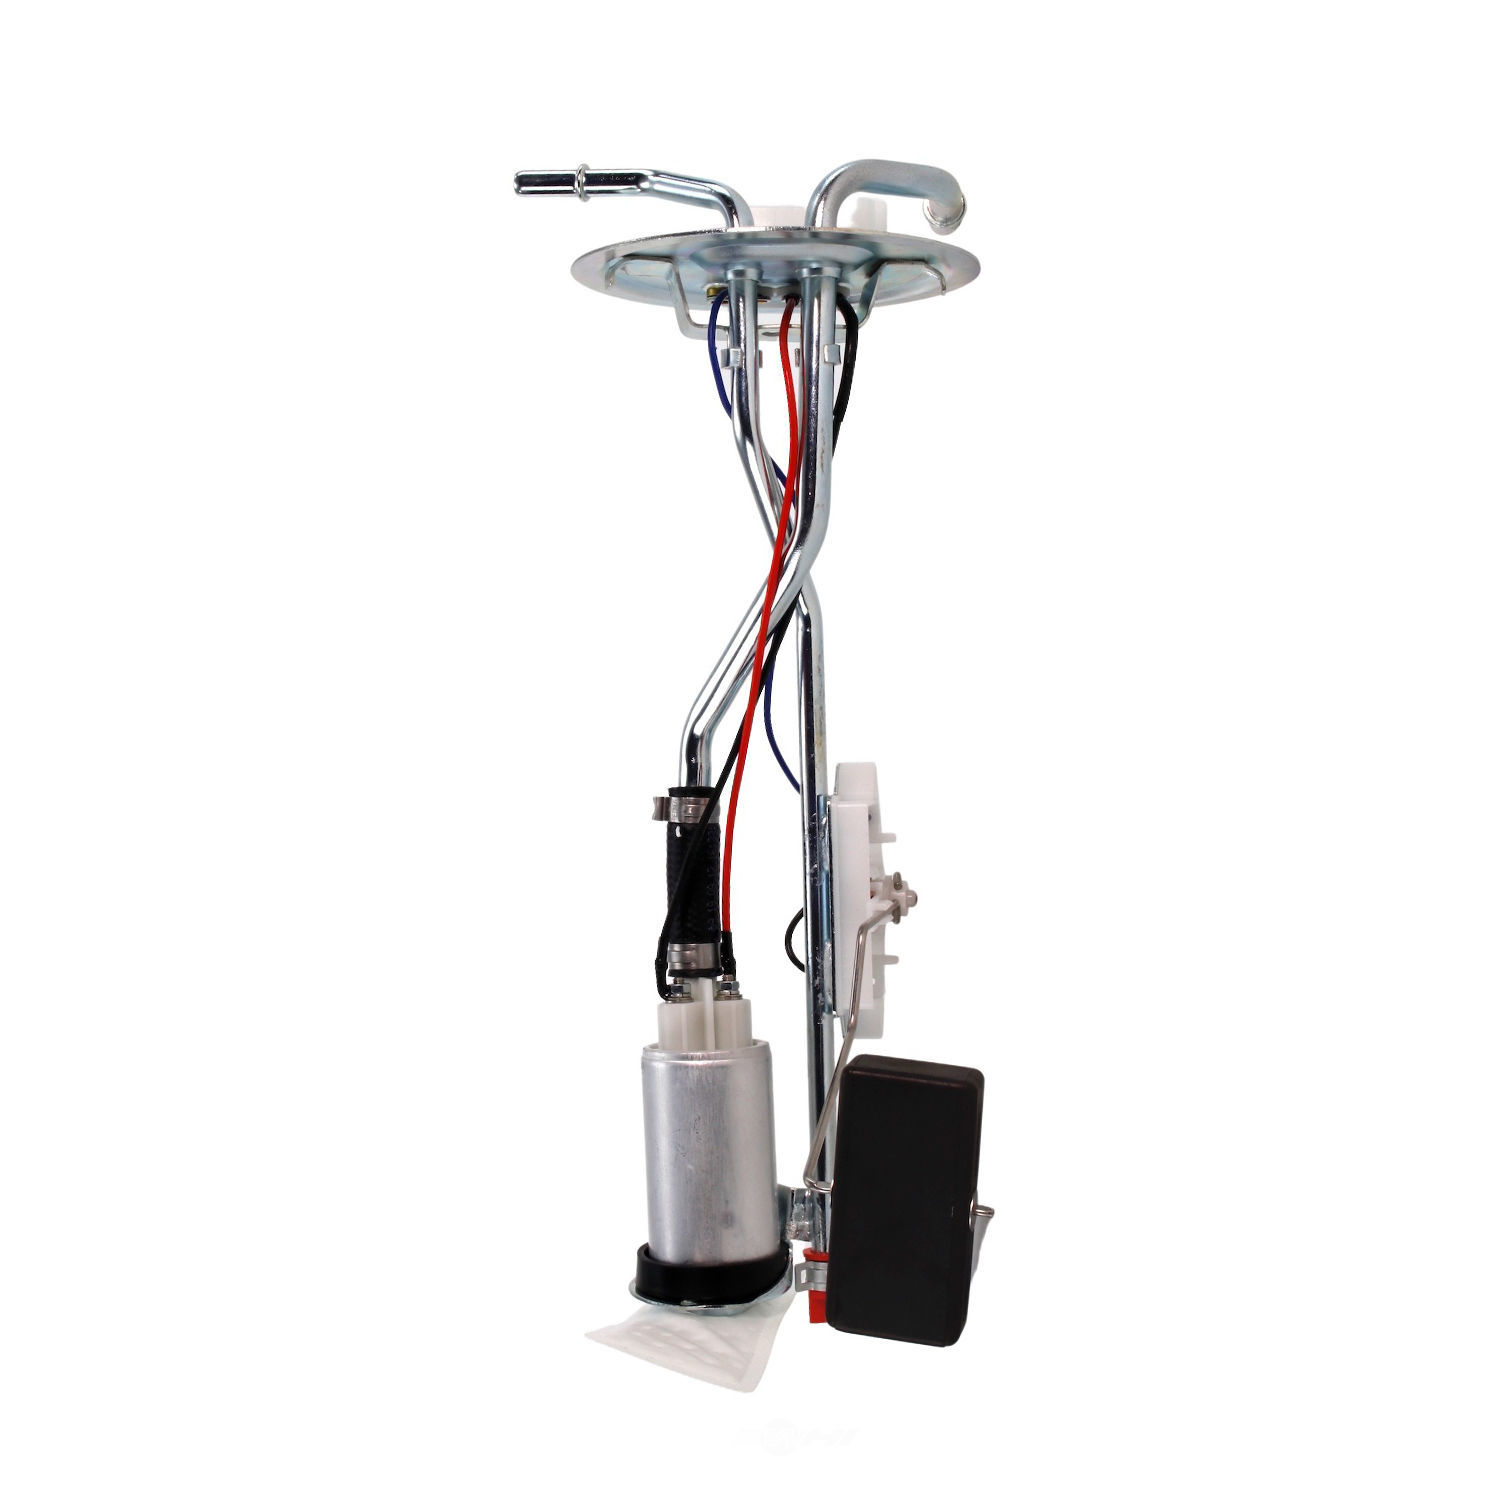 GMB - Fuel Pump And Sender Assembly - GMB 525-6019